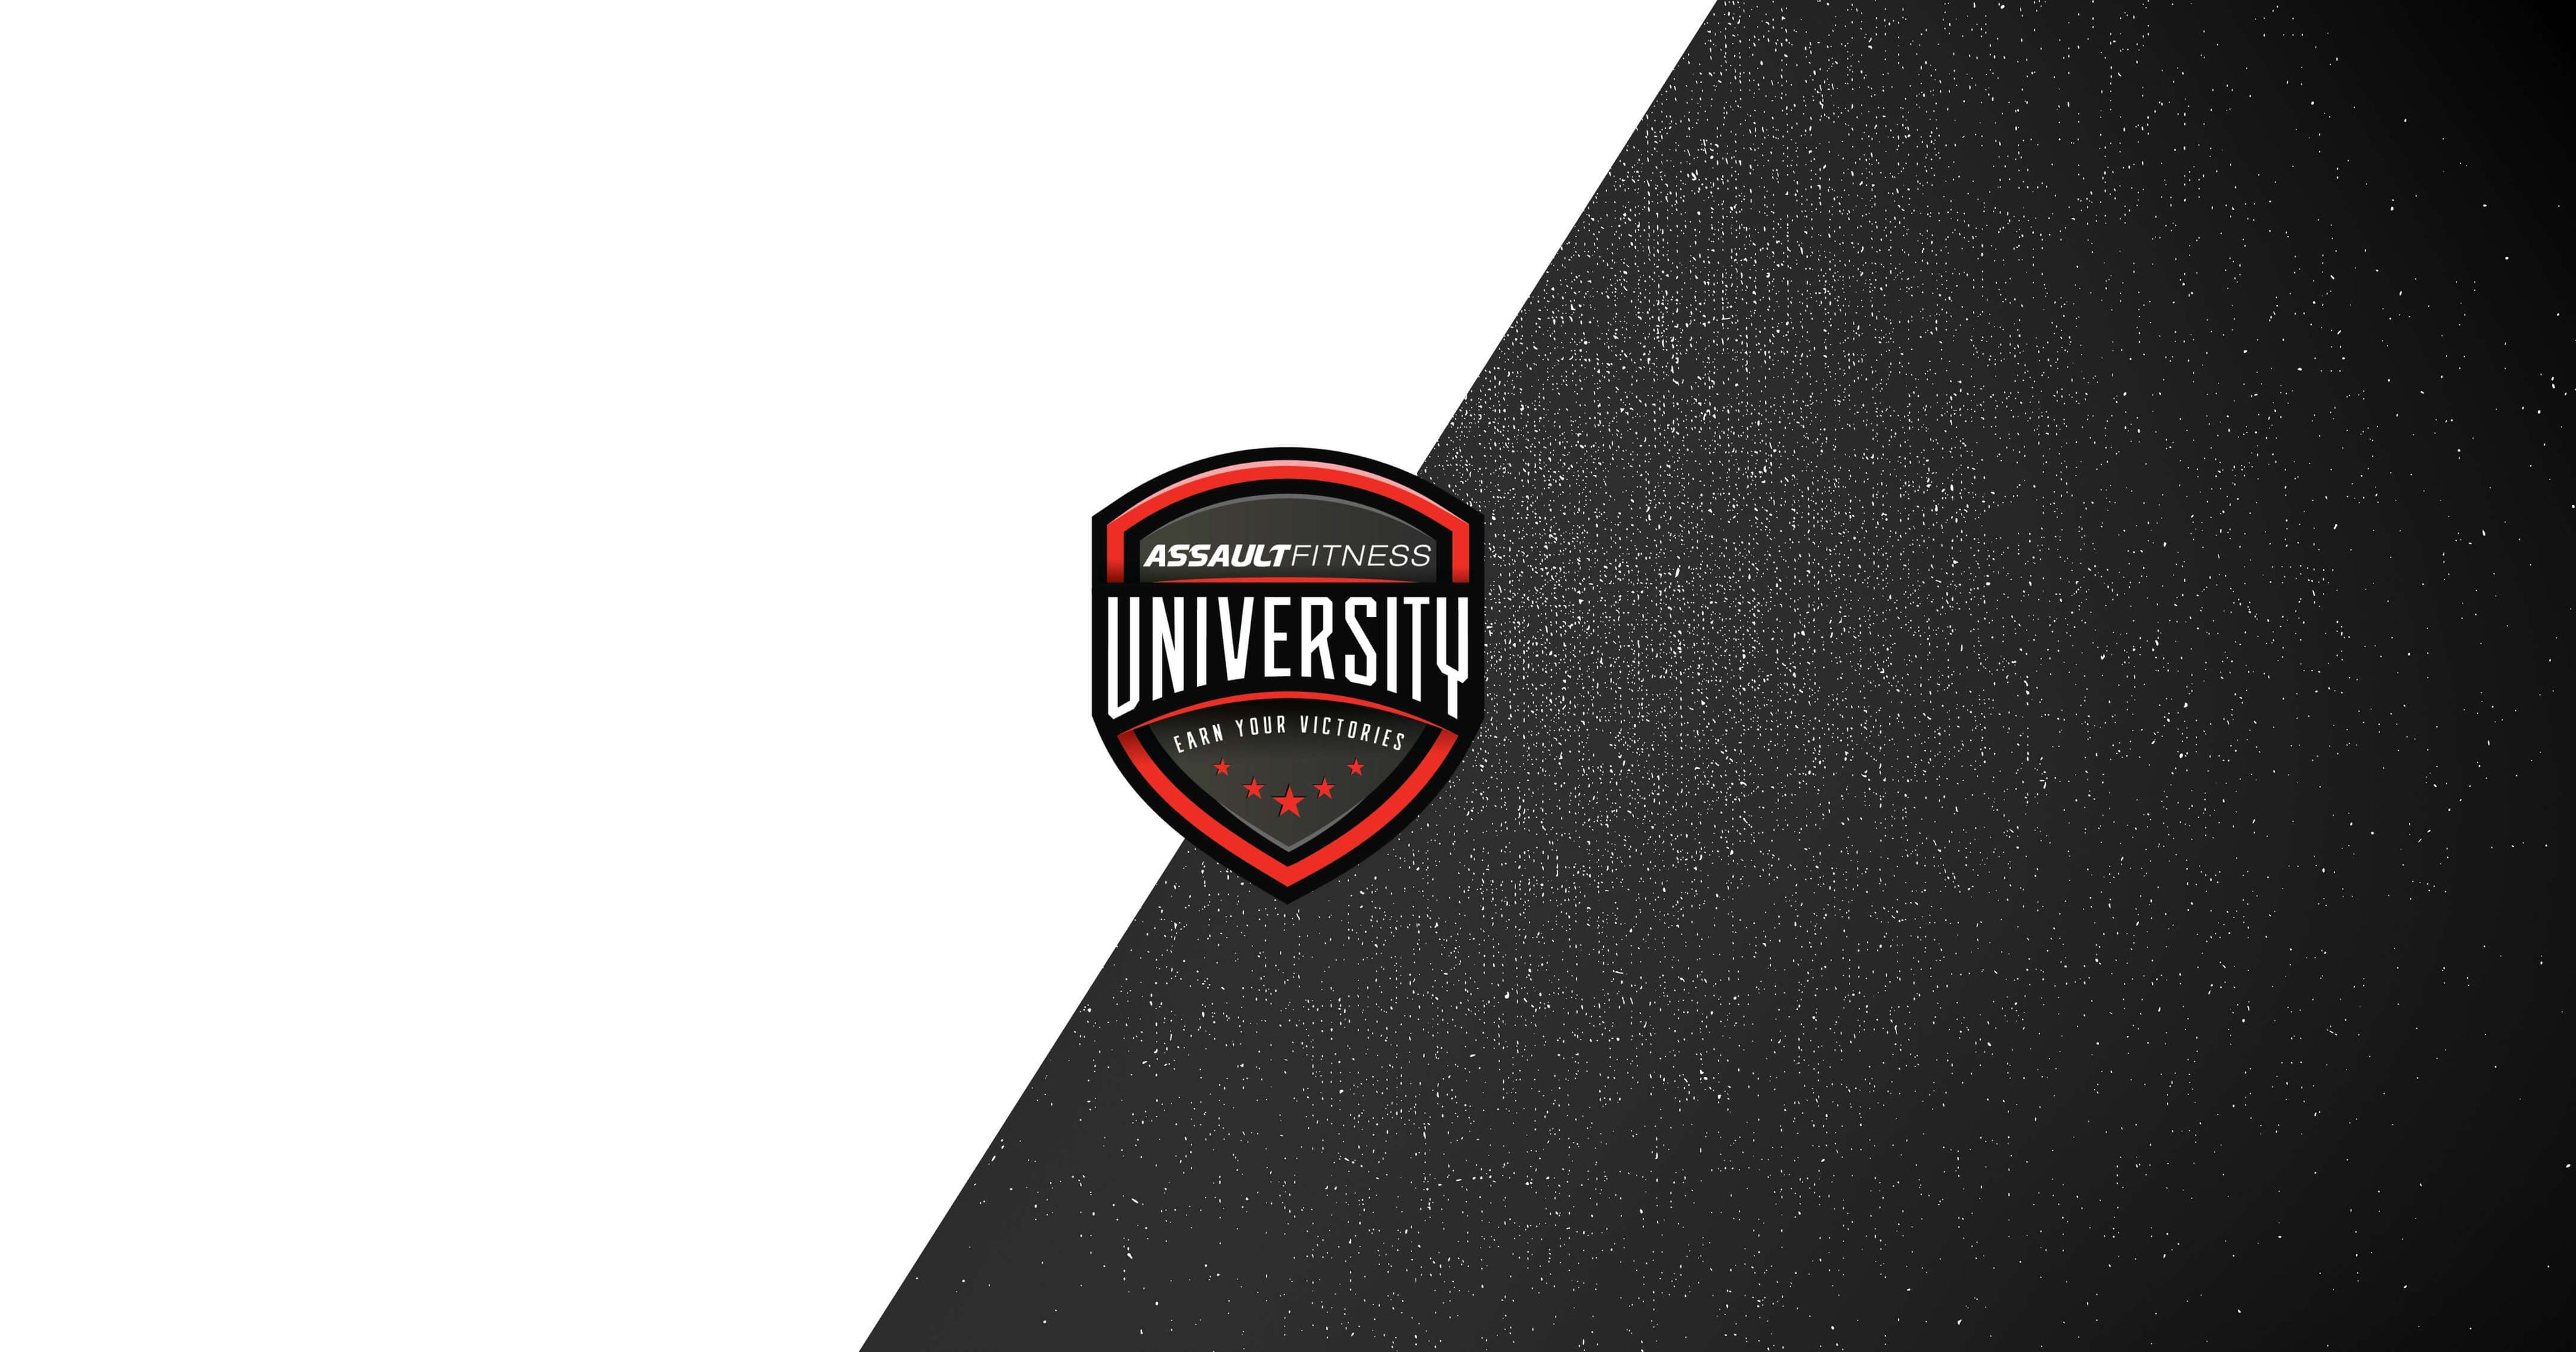 Hero image displaying the Assault Fitness University Earn Your Victories shield and starts logo on a black and white diagonal split background